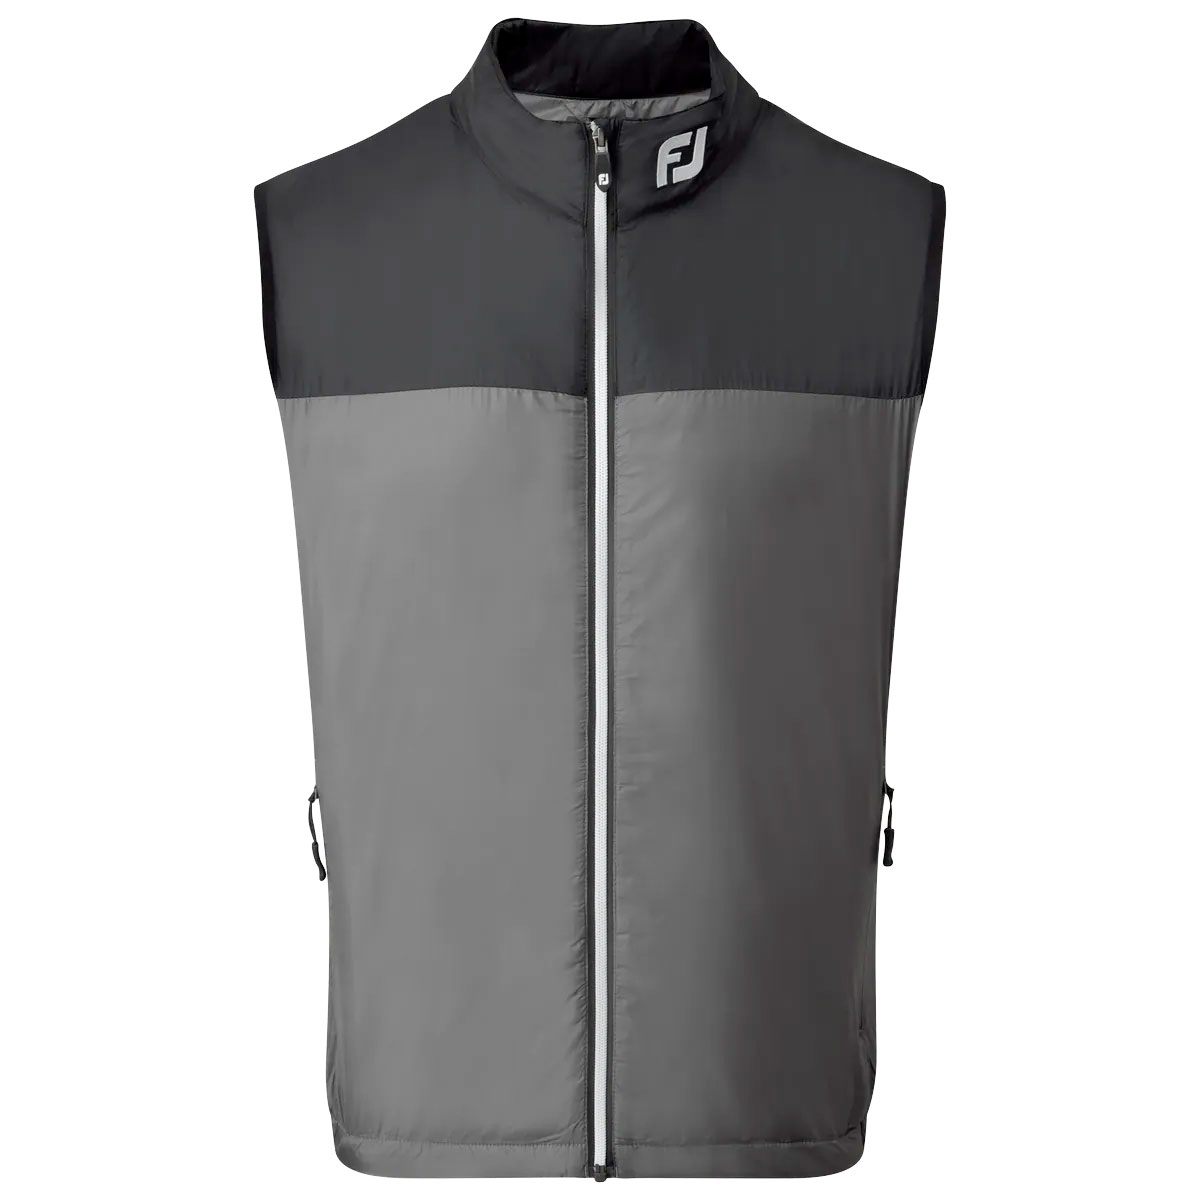 FootJoy Lightweight Thermal Insulated Vest Gilet  - Black/Charcoal